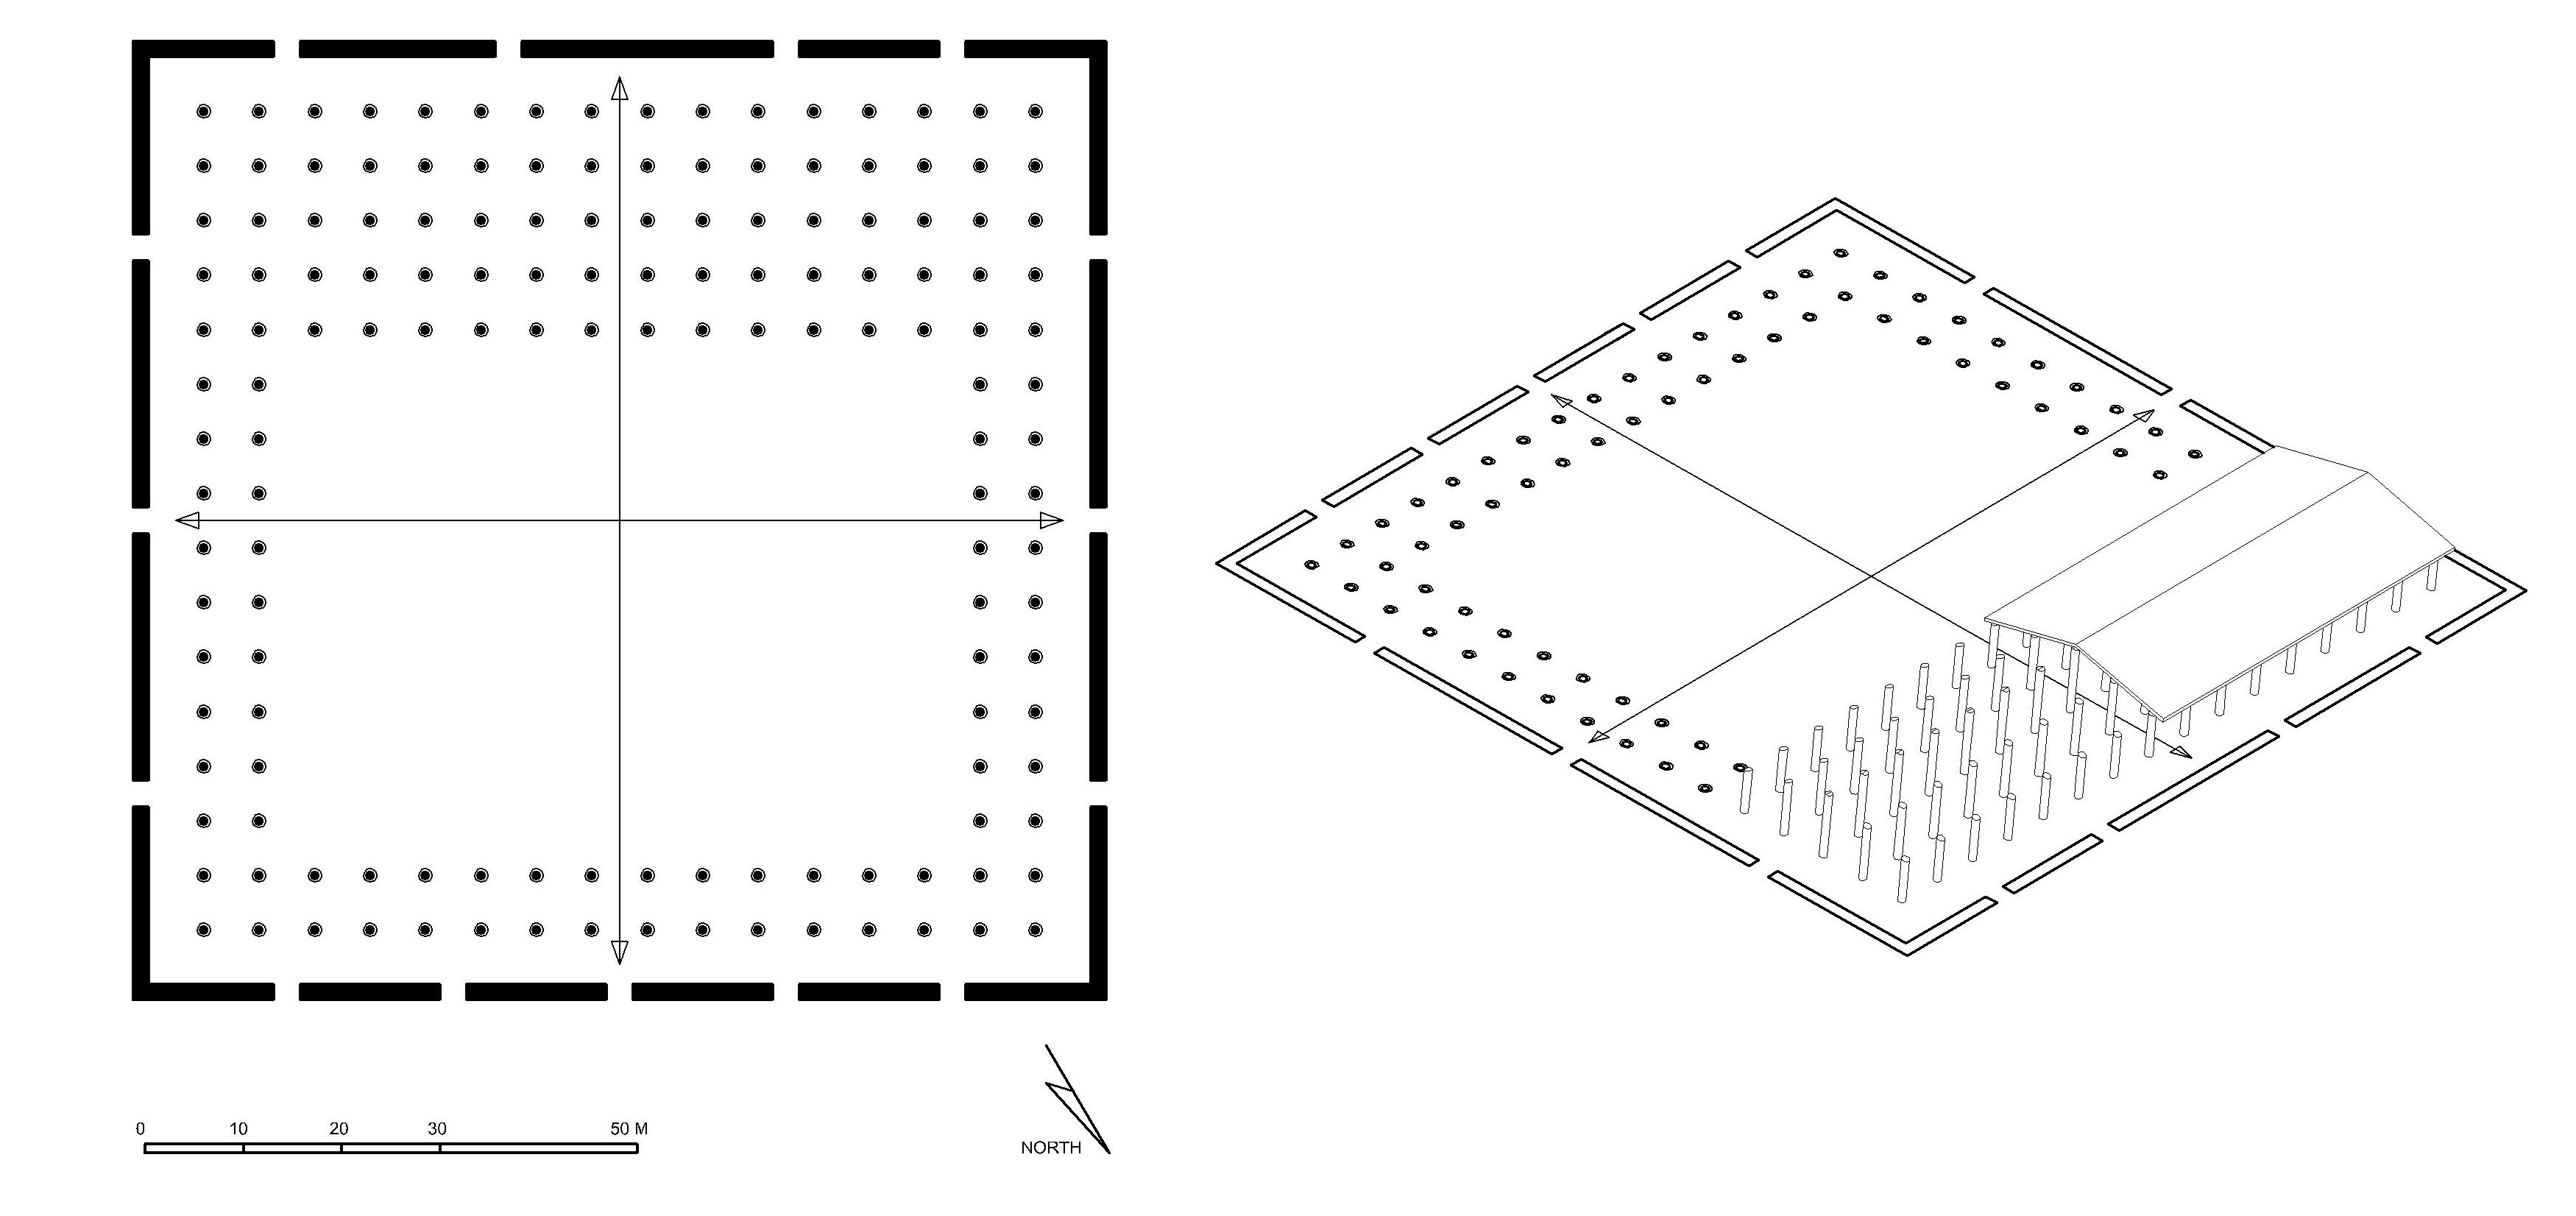 Masjid al-Kufa - Floor plan of mosque in AutoCAD 2000 format. Click the download button to download a zipped file containing the .dwg file. 